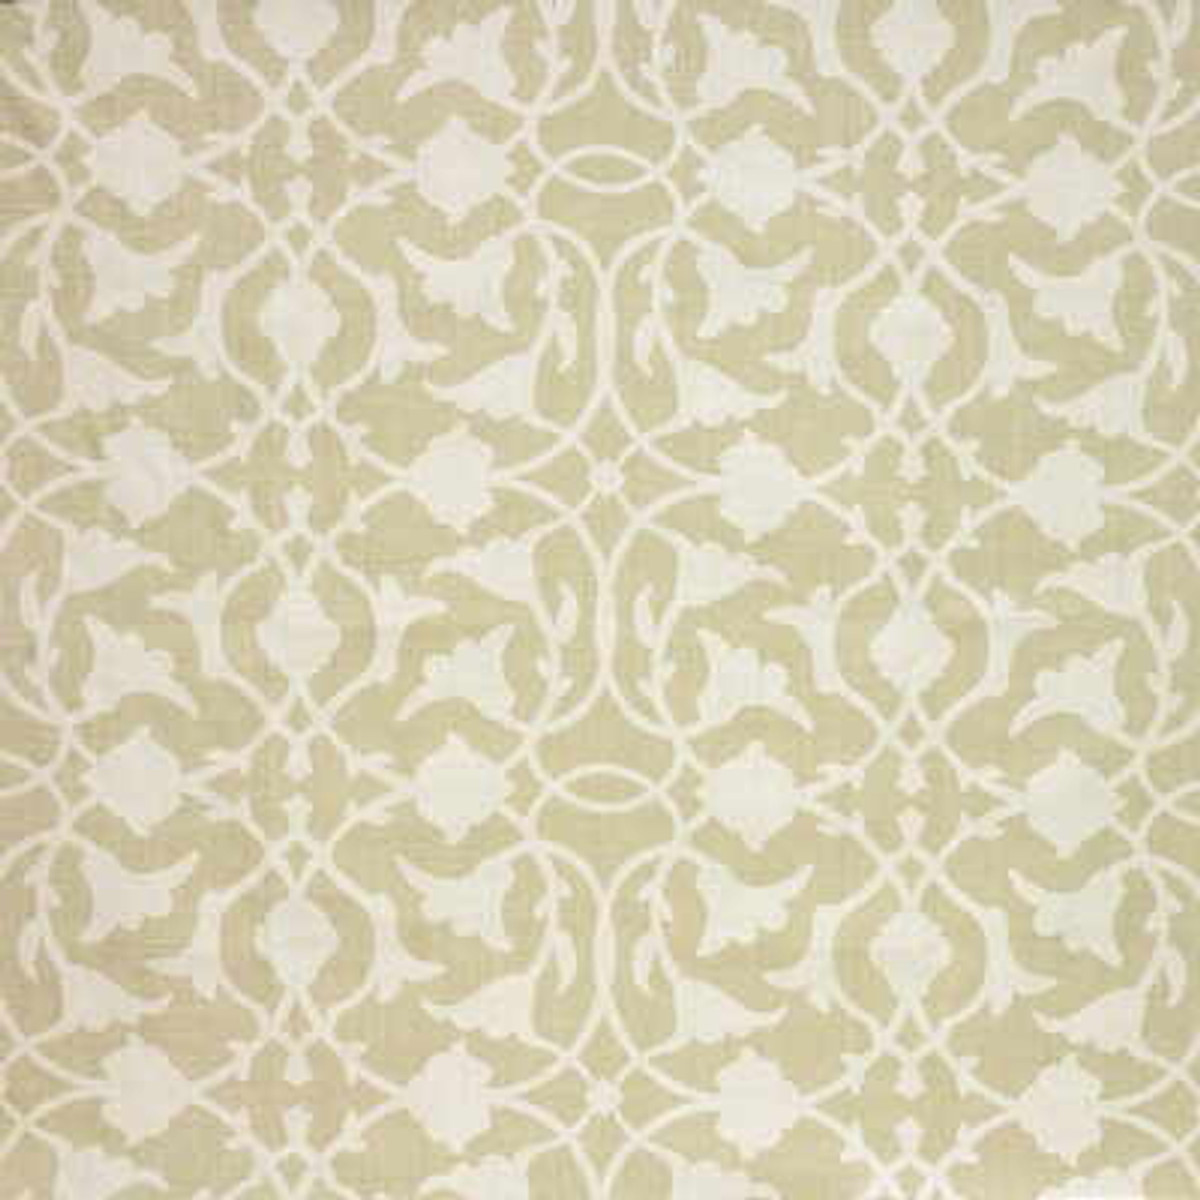 Kravet Couture Barbara Barry Poetical Roman Shades